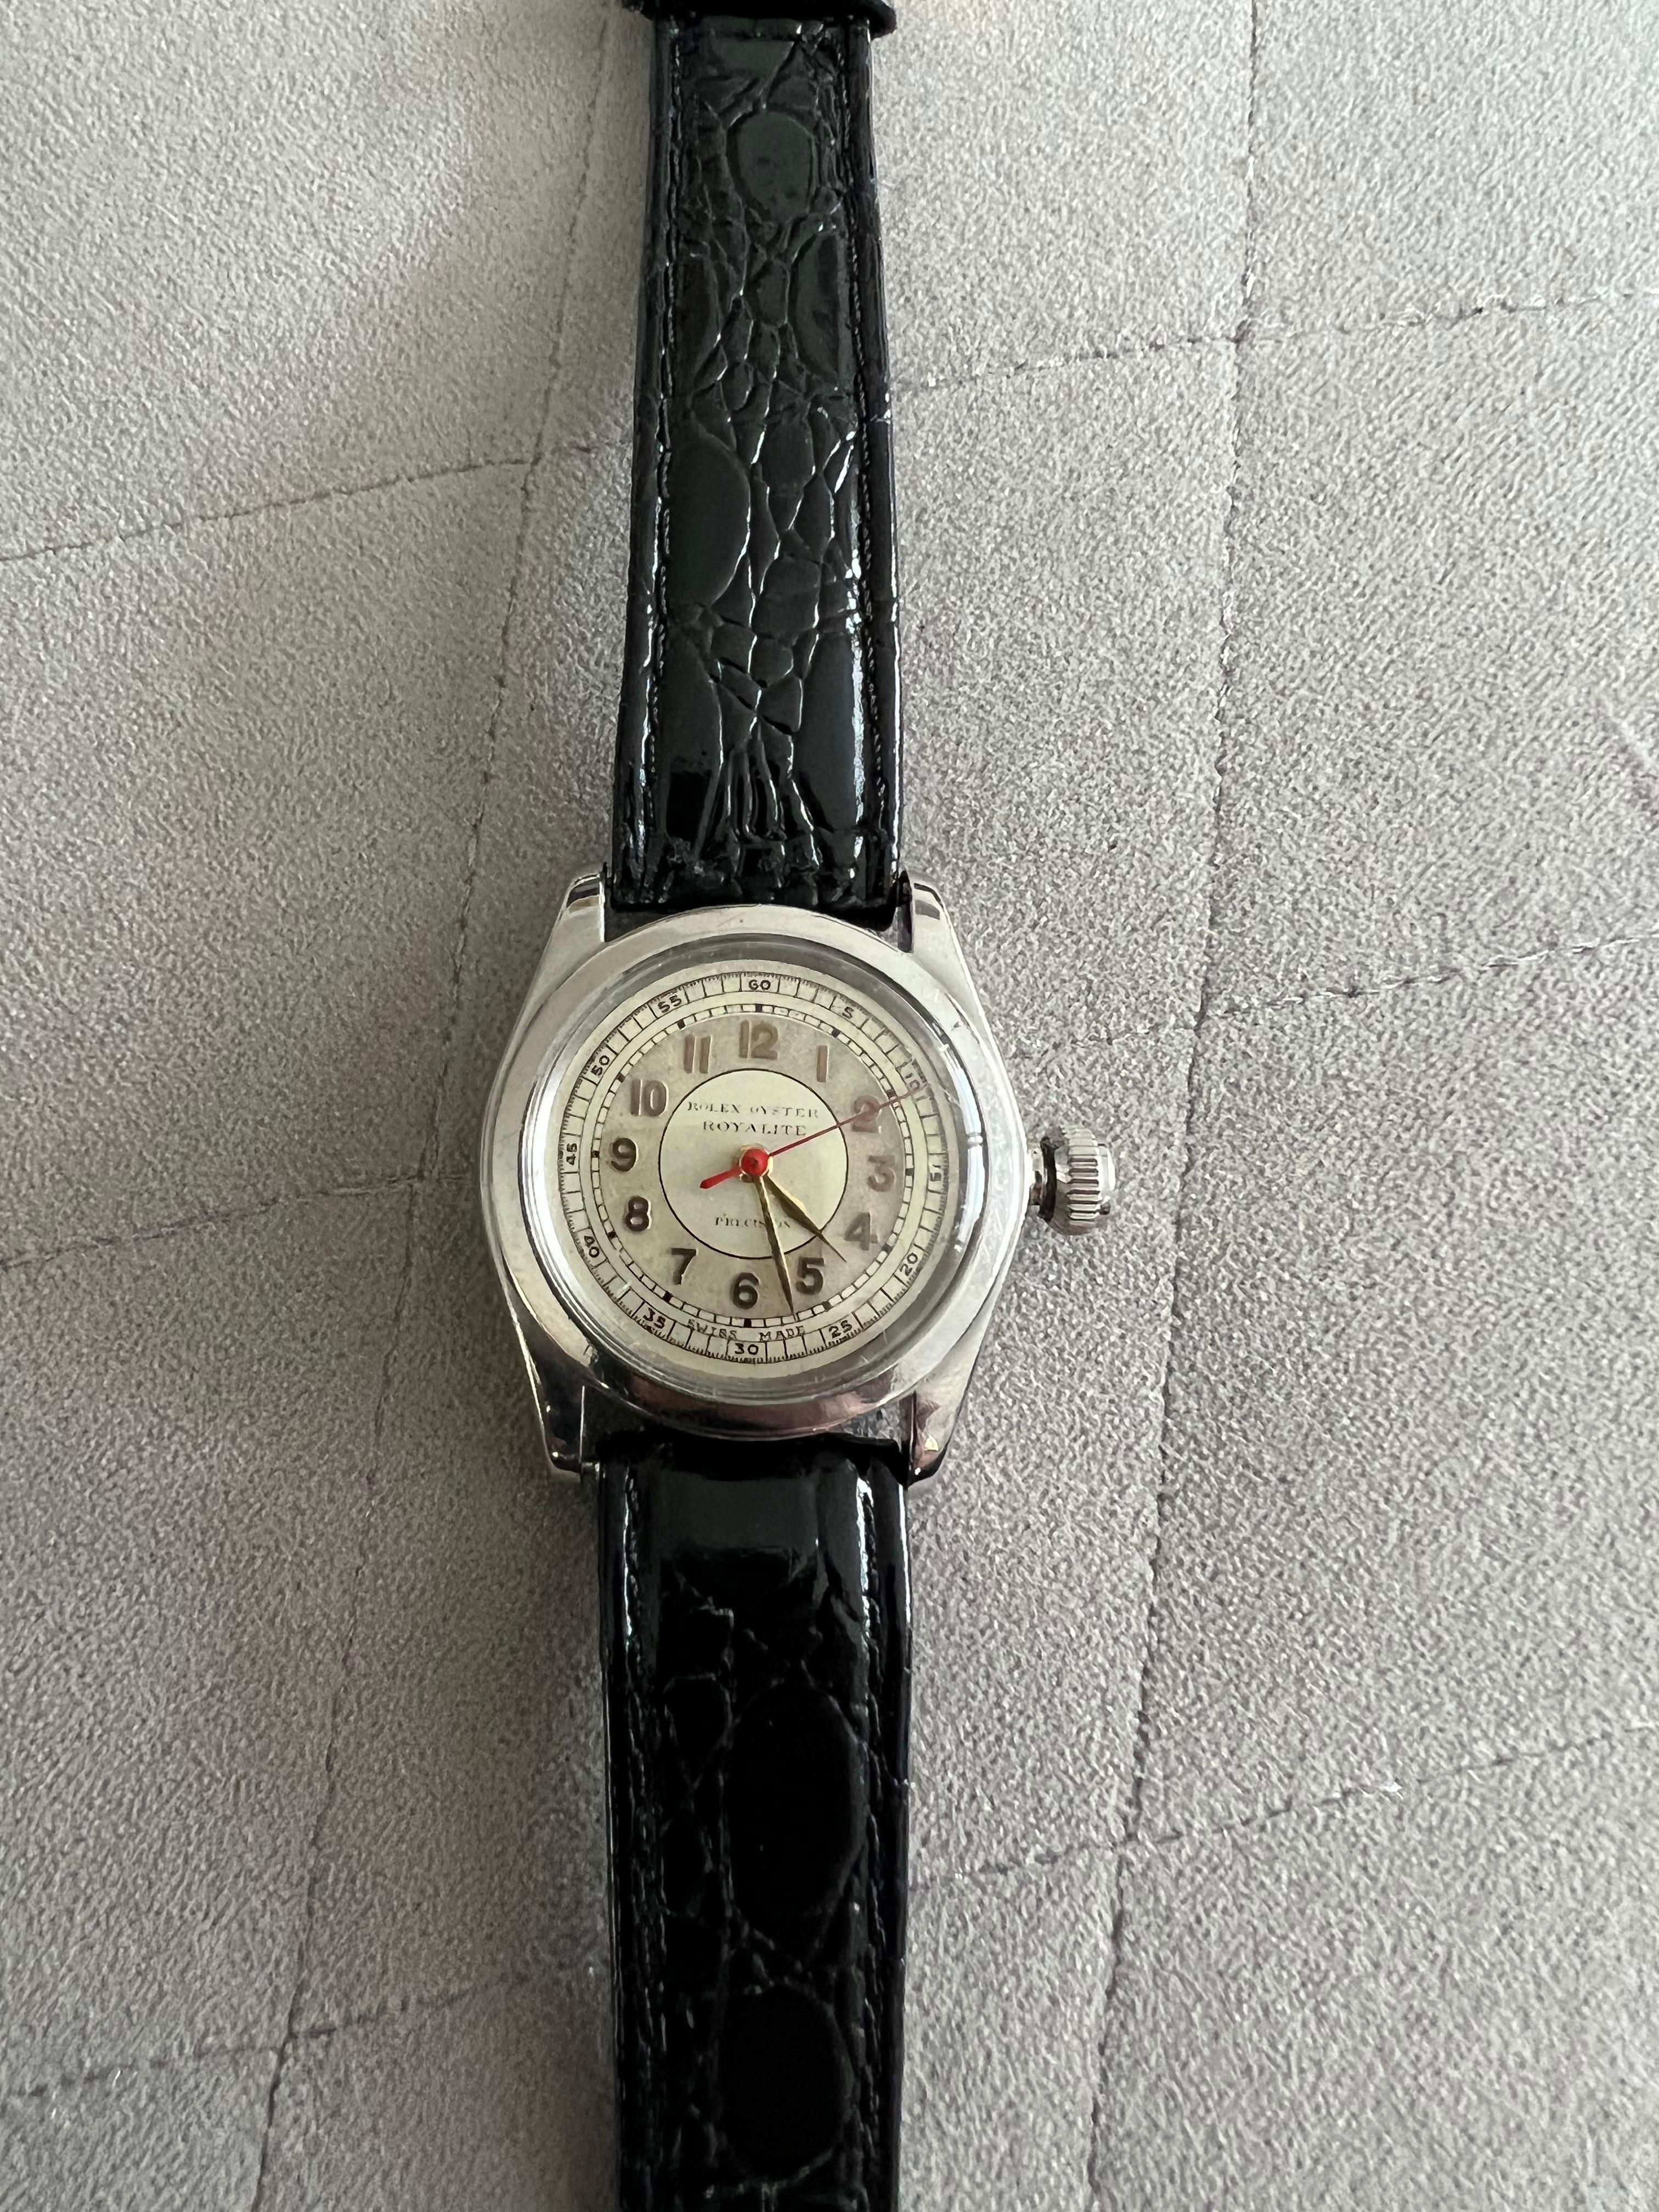 A rare and exiting Rolex oyster Royalite ww2 area in mint condition!!!
Stunning. A piece of history on your wrist, this is what wearing a wrist watch like this should be. 
Issued during WW2 to Canadian airmen. 
Oversized military crown. 
CIRCA: